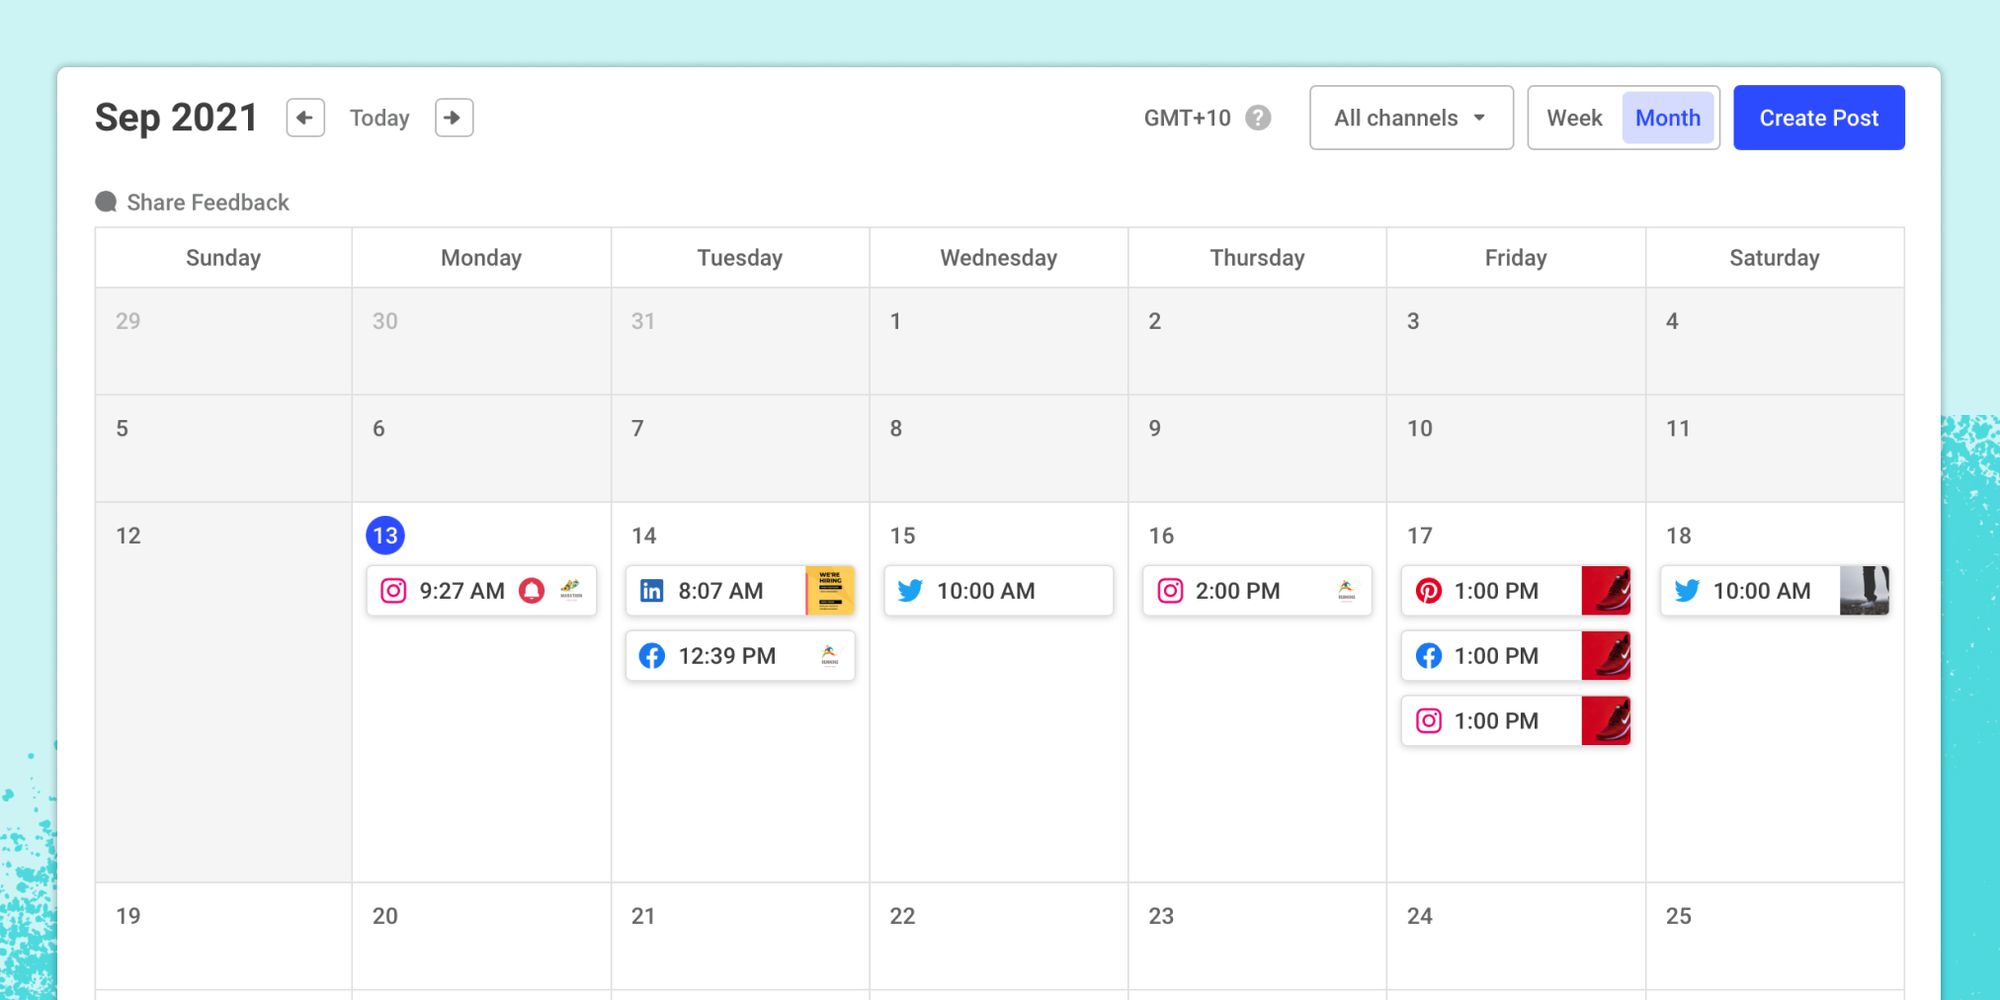 An example of a social media calendar with posts for multiple platforms